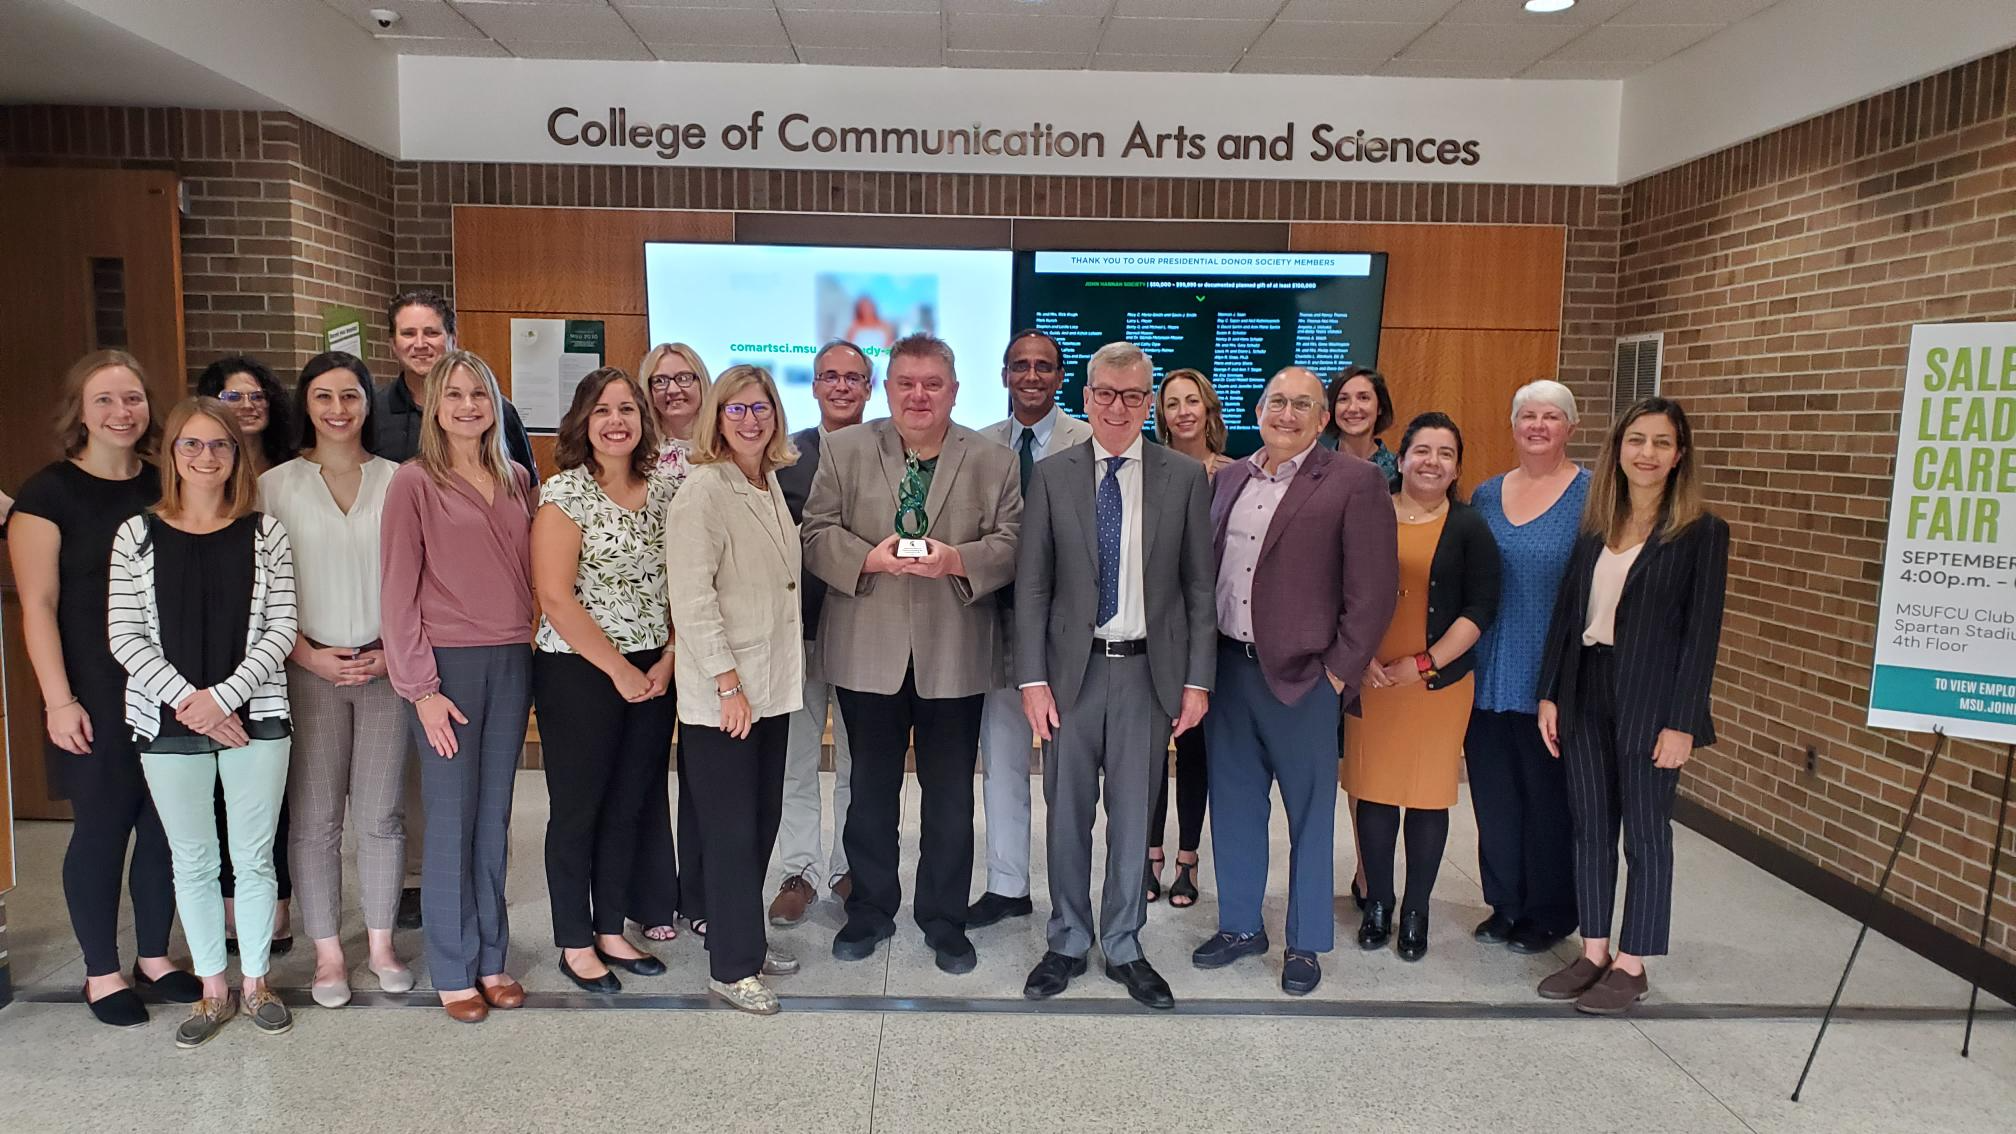 Picture of all of the faculty members in the Department of Communicative Sciences and Disorders in the south lobby of the ComArtSci building